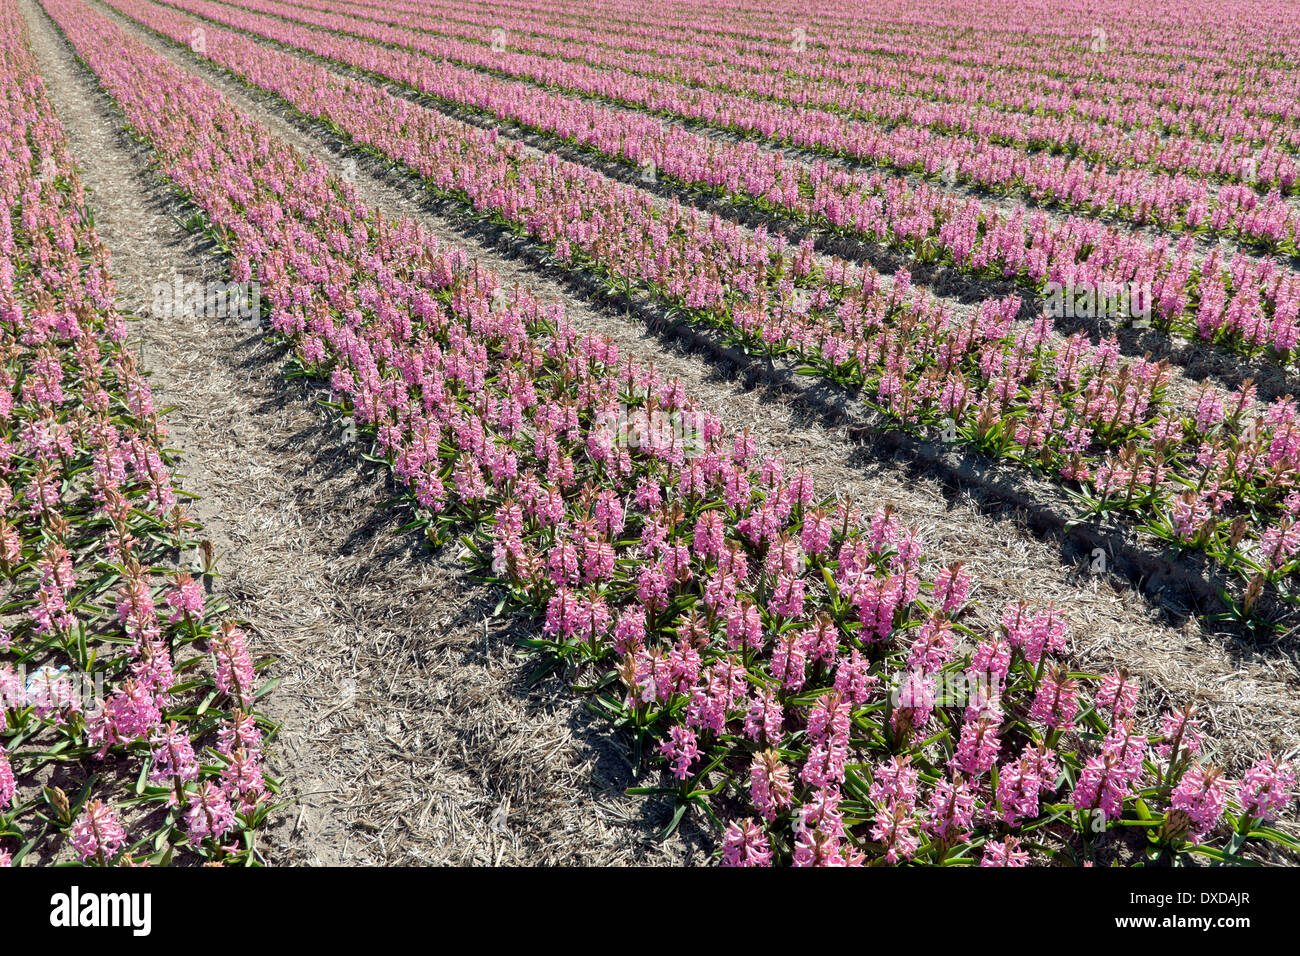 Spring time in The Netherlands: Endless rows of pink hyacinths, blooming at full peak at Noordwijk, South Holland. Stock Photo